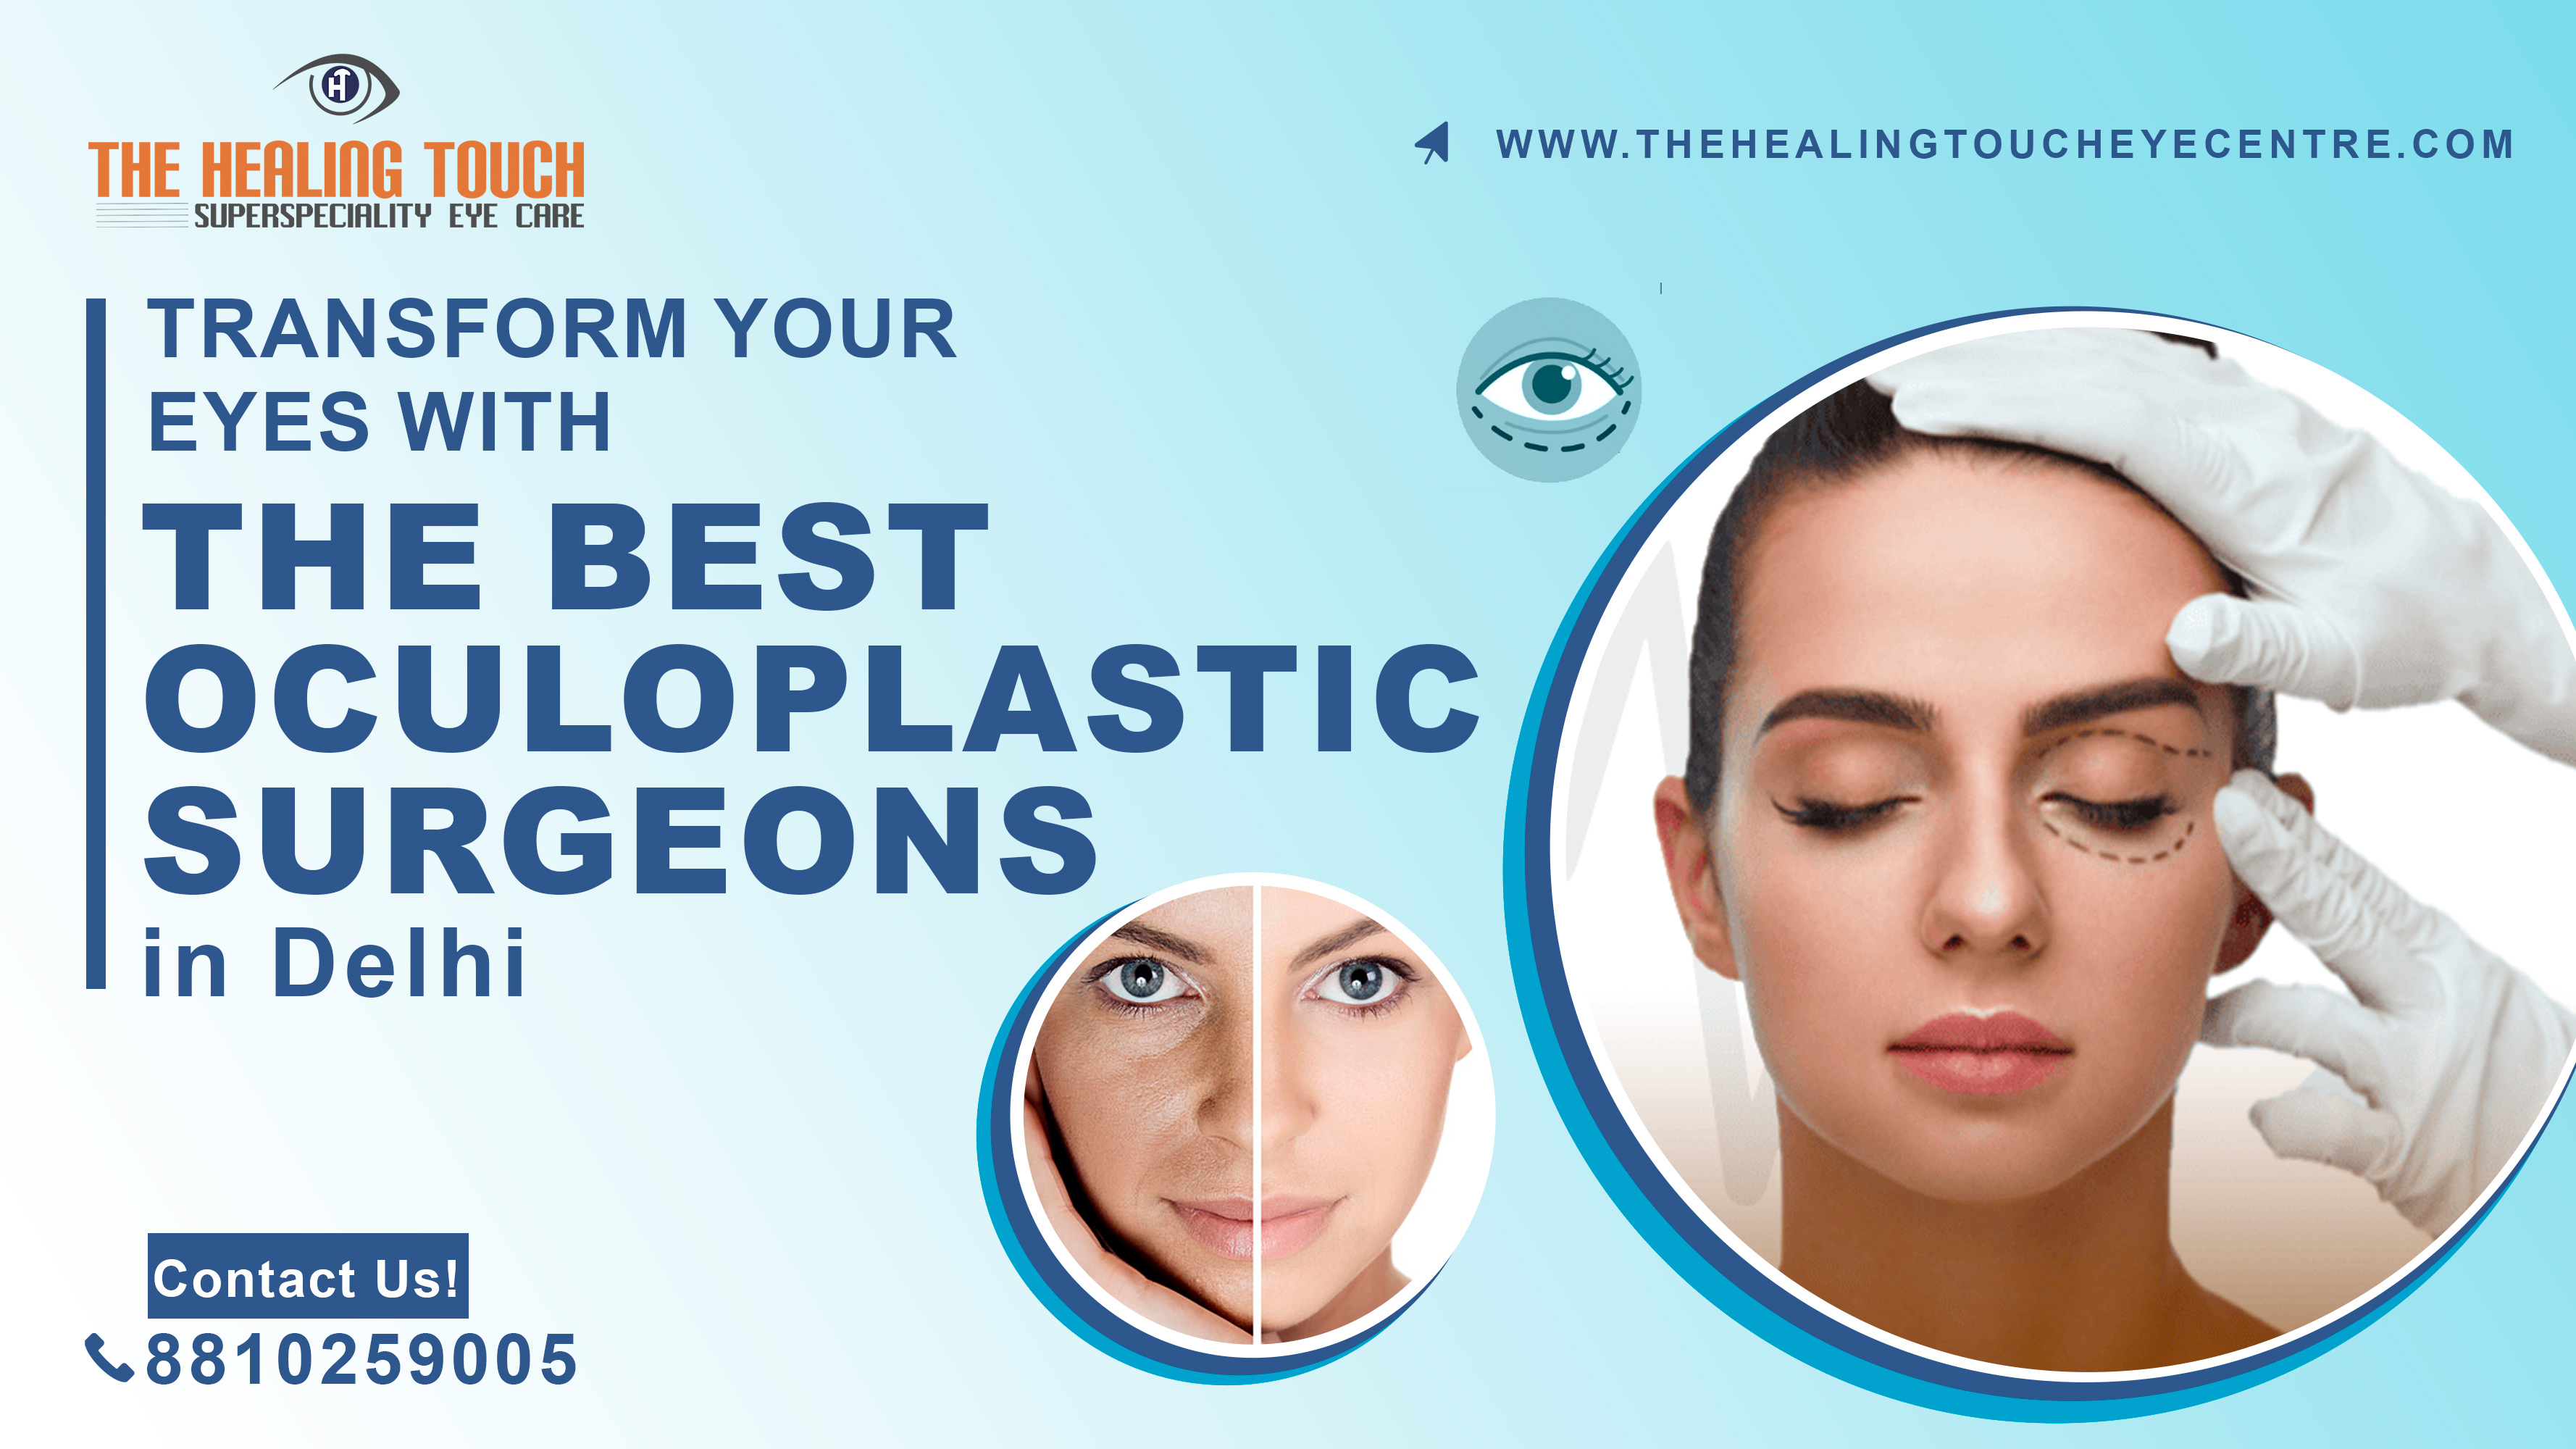 Transform Your Eyes with the Best Oculoplastic Surgeons in Delhi